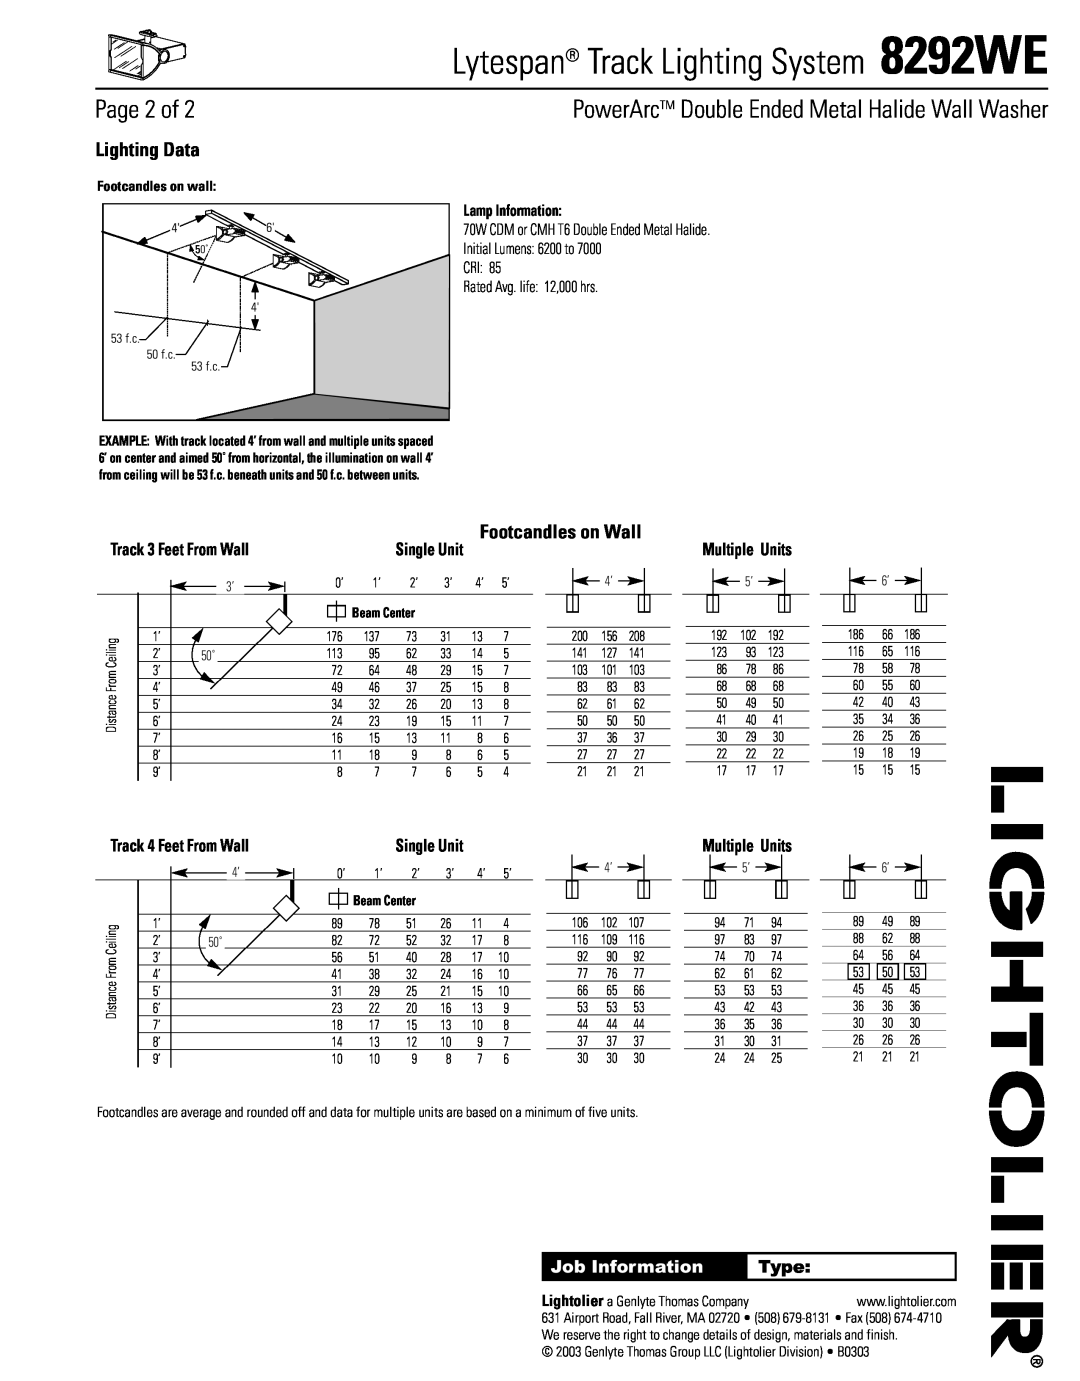 Lightolier Lighting Data, Footcandles on Wall, Multiple Units, Type, Lytespan Track Lighting System 8292WE, Page 2 of 